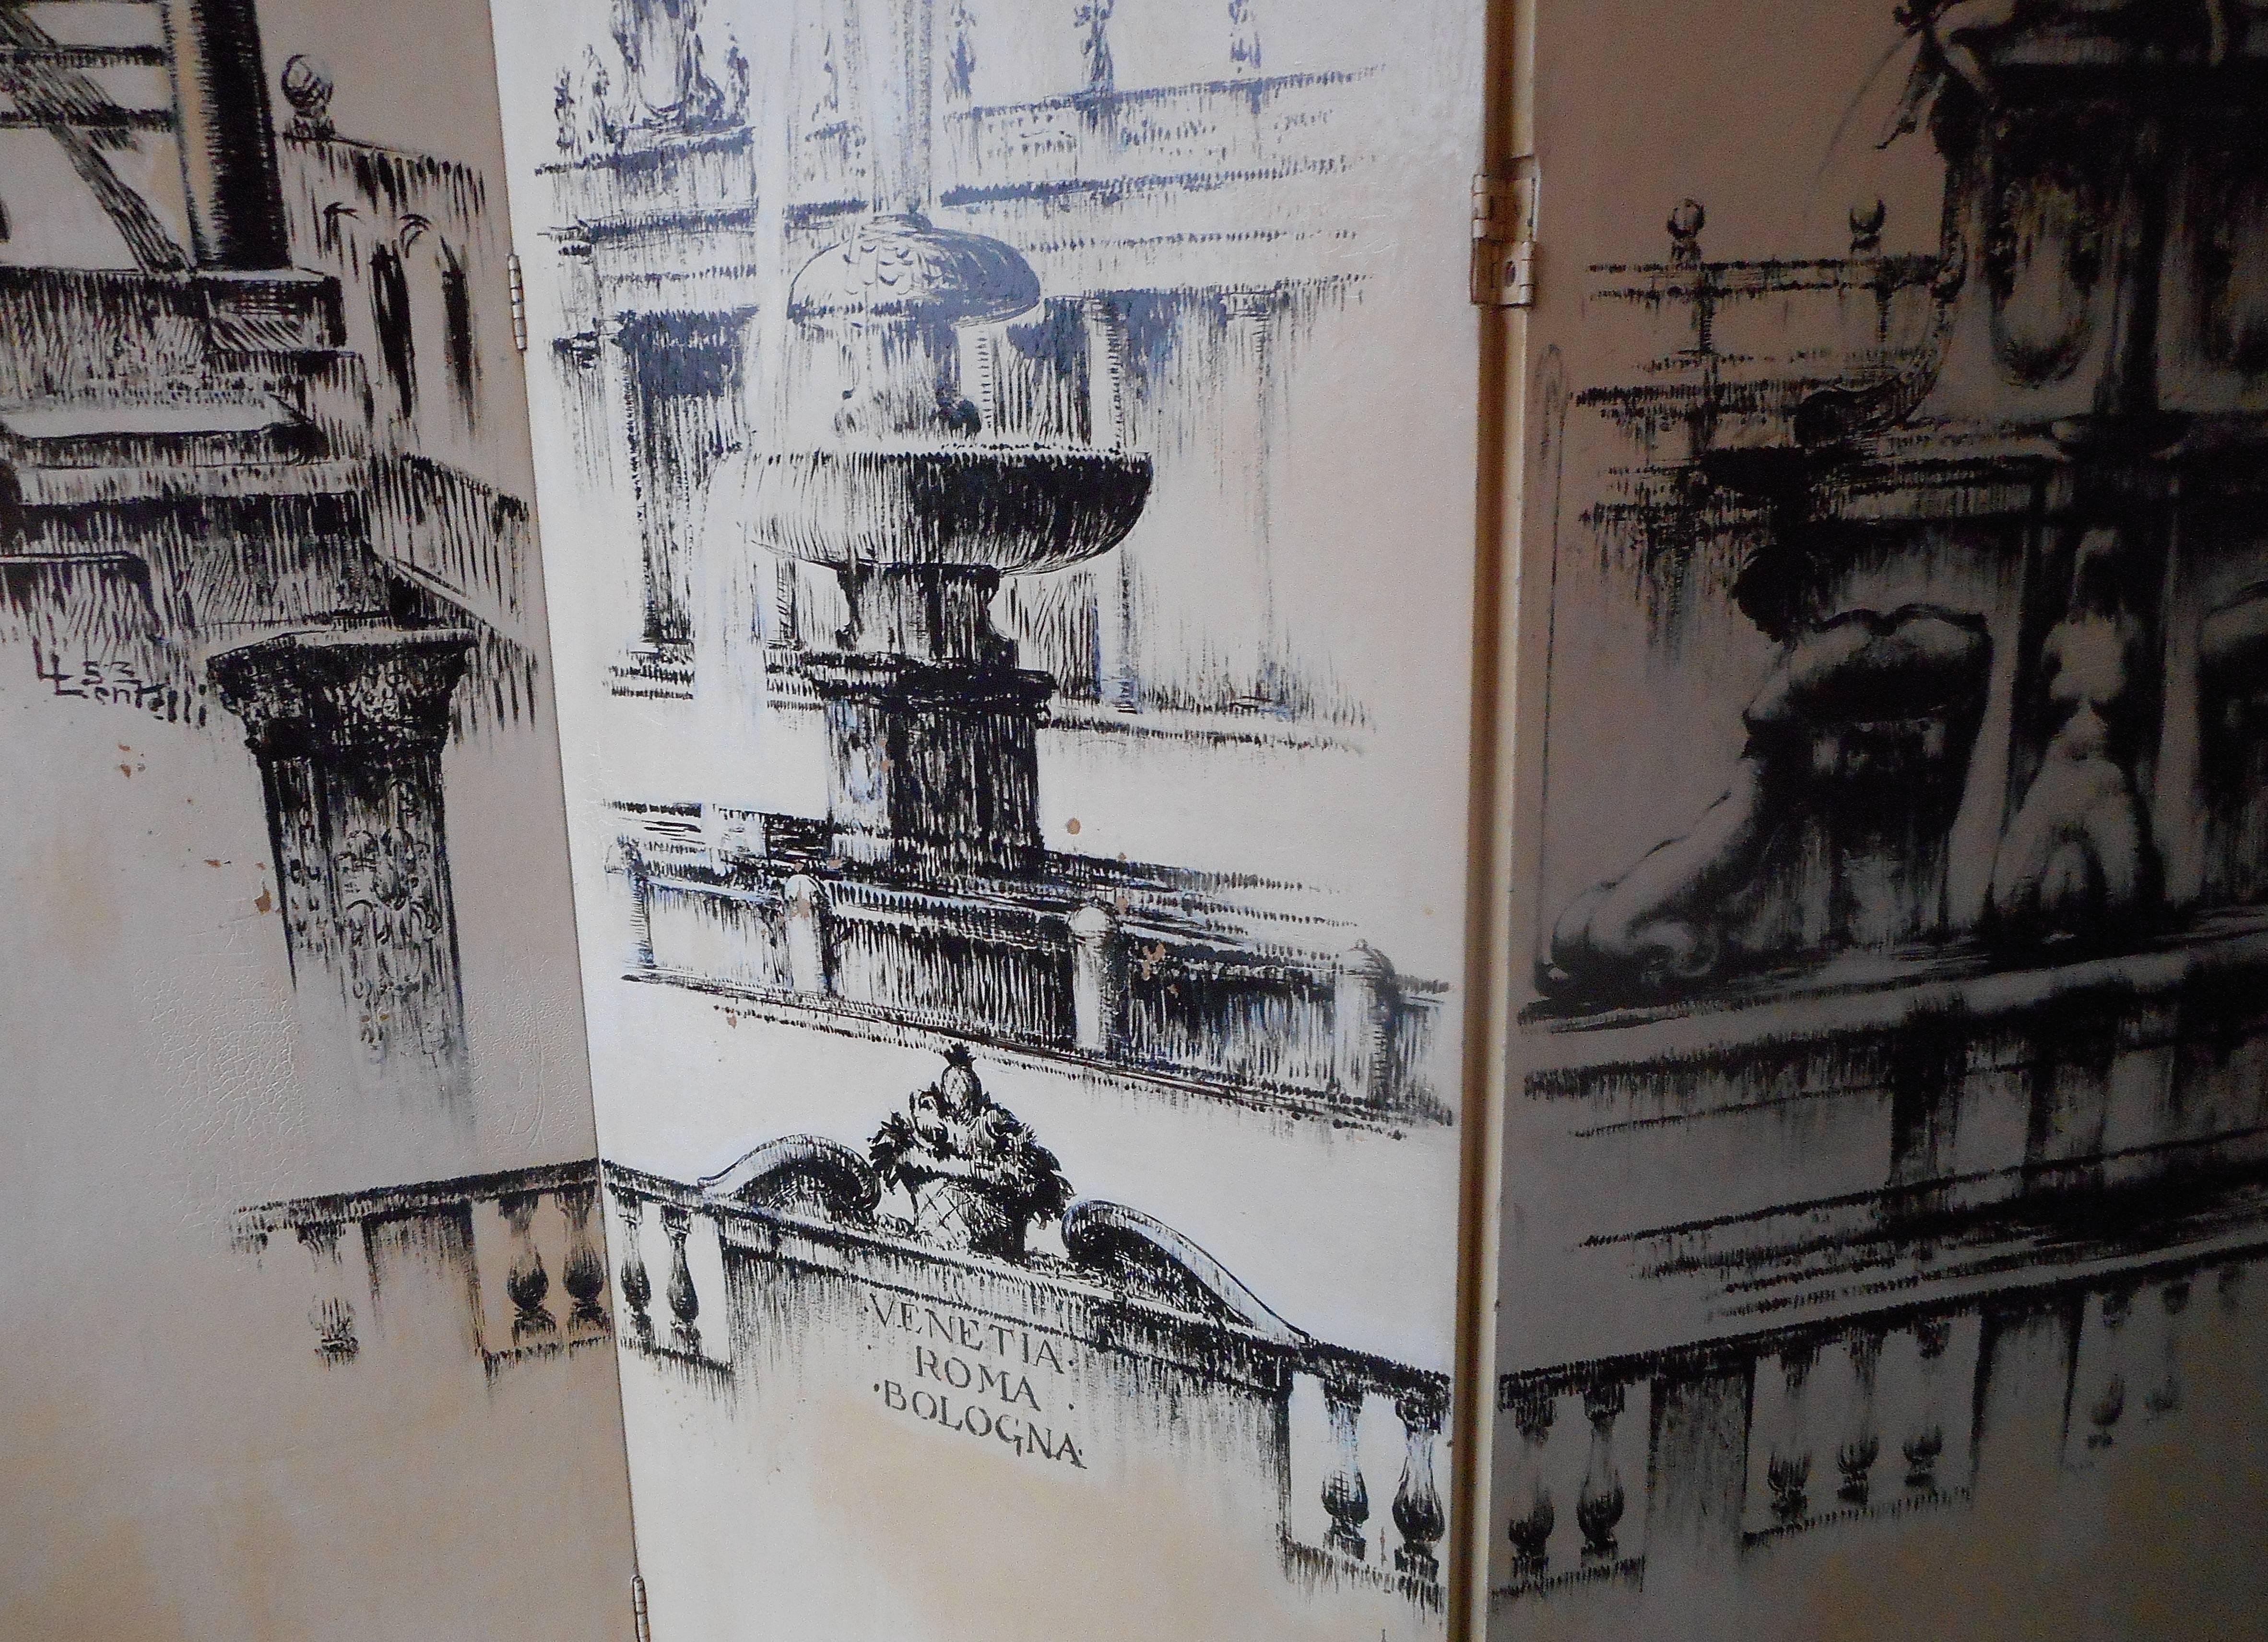 Three folds showing Italians historical monuments (Roma, Bologna, Venezia) and painted by the renown artist Leo Lentelli.
In the style of Piero Fornasetti.
Signed and dated 1953.